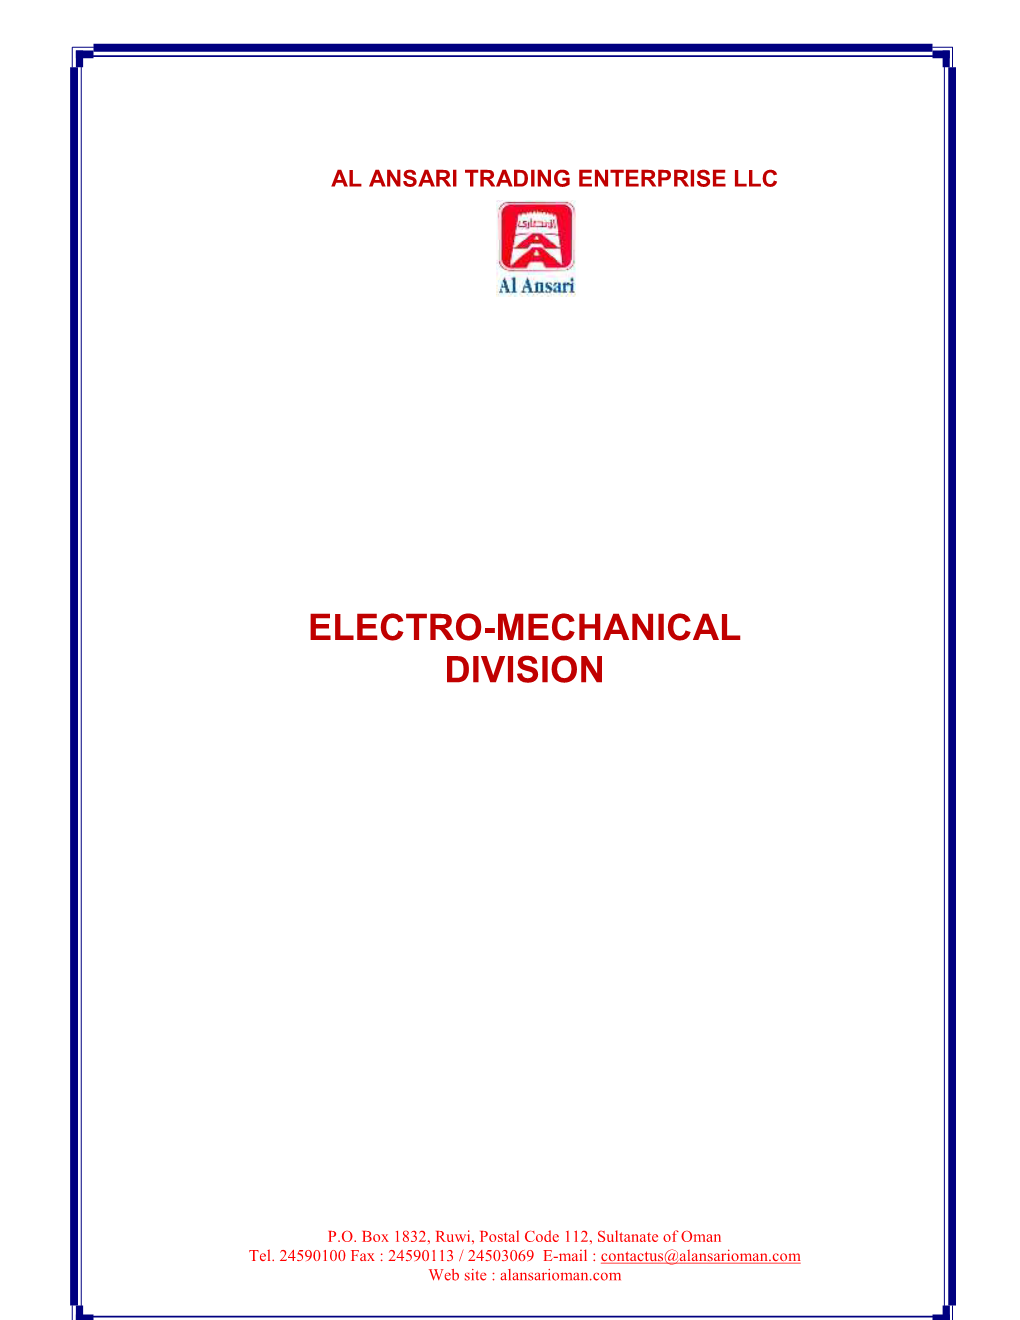 Electro-Mechanical Division